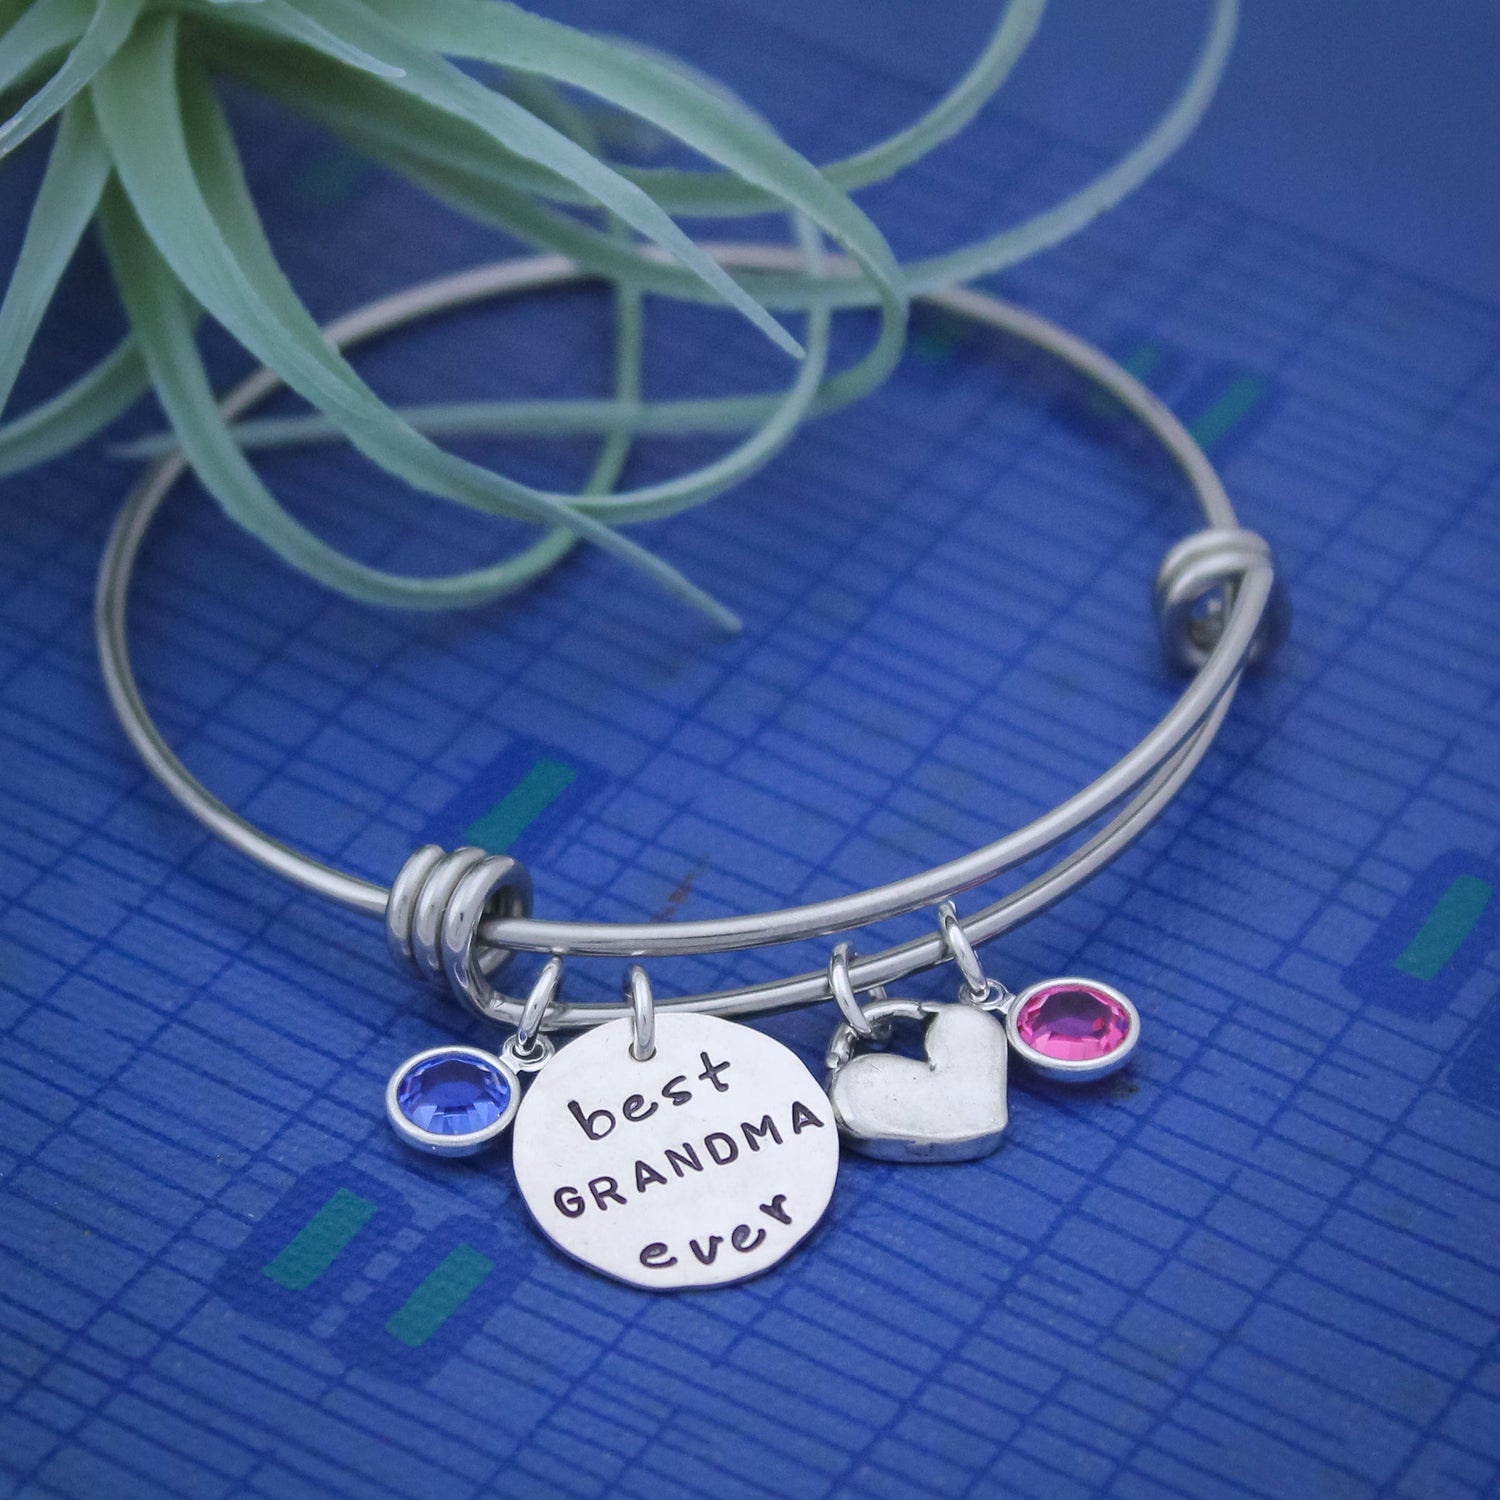 Personalized Best Grandma Ever Bracelet, Best Mom Ever Bangle, Grandmother Bracelet, Mother Bracelet, Mother's Day Gift,Hand Stamped Jewelry